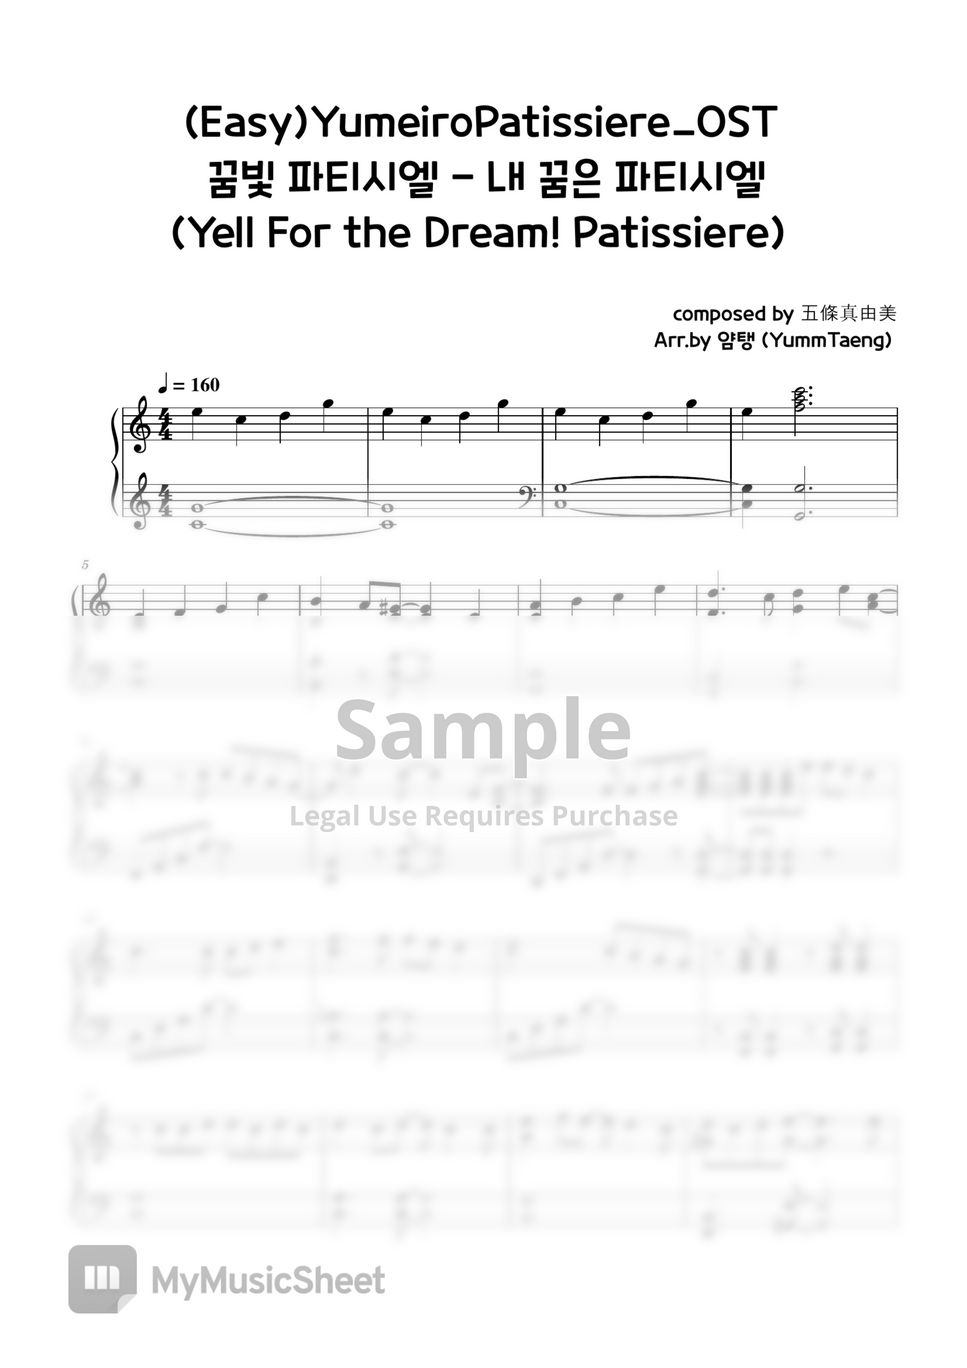 (Easy)Yumeiro Patissiere - Yell For the Dream! Patissiere by YummTaeng